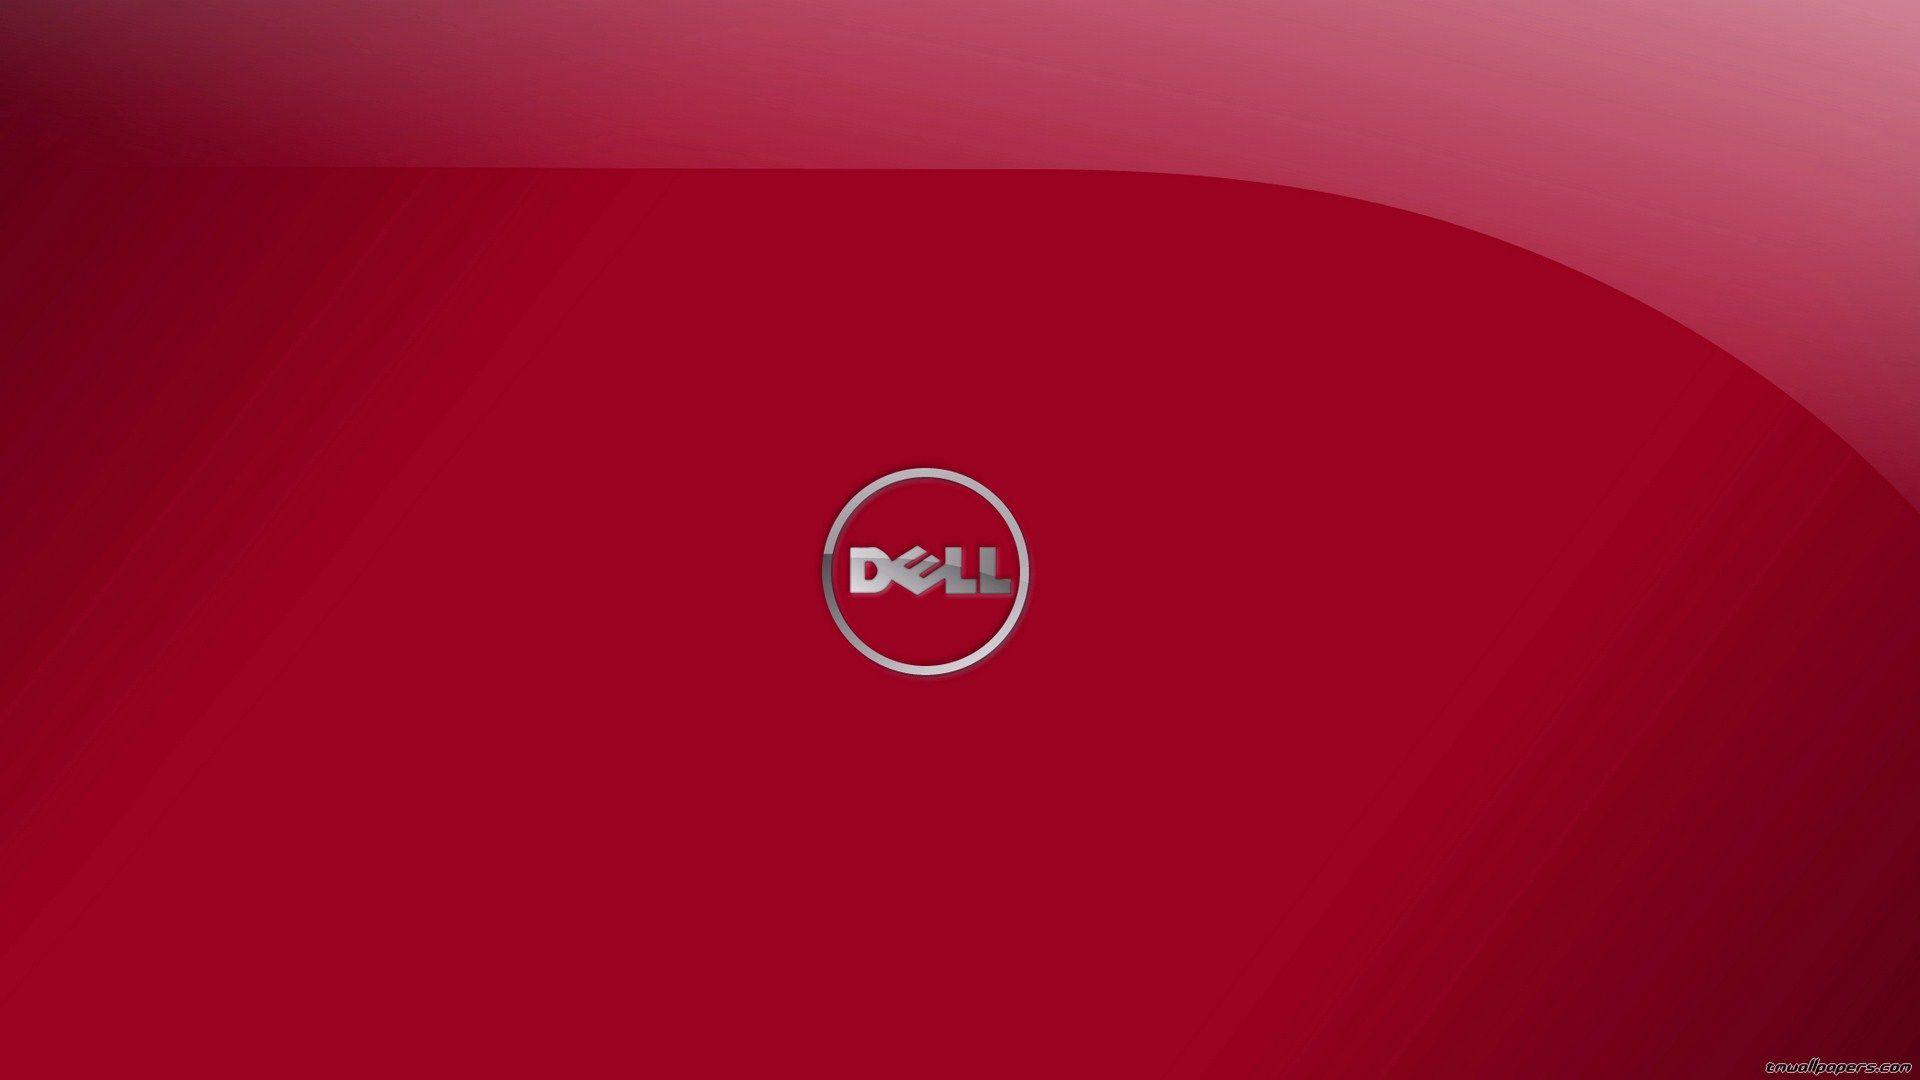 Dell 4k Red Wallpaper Top Background